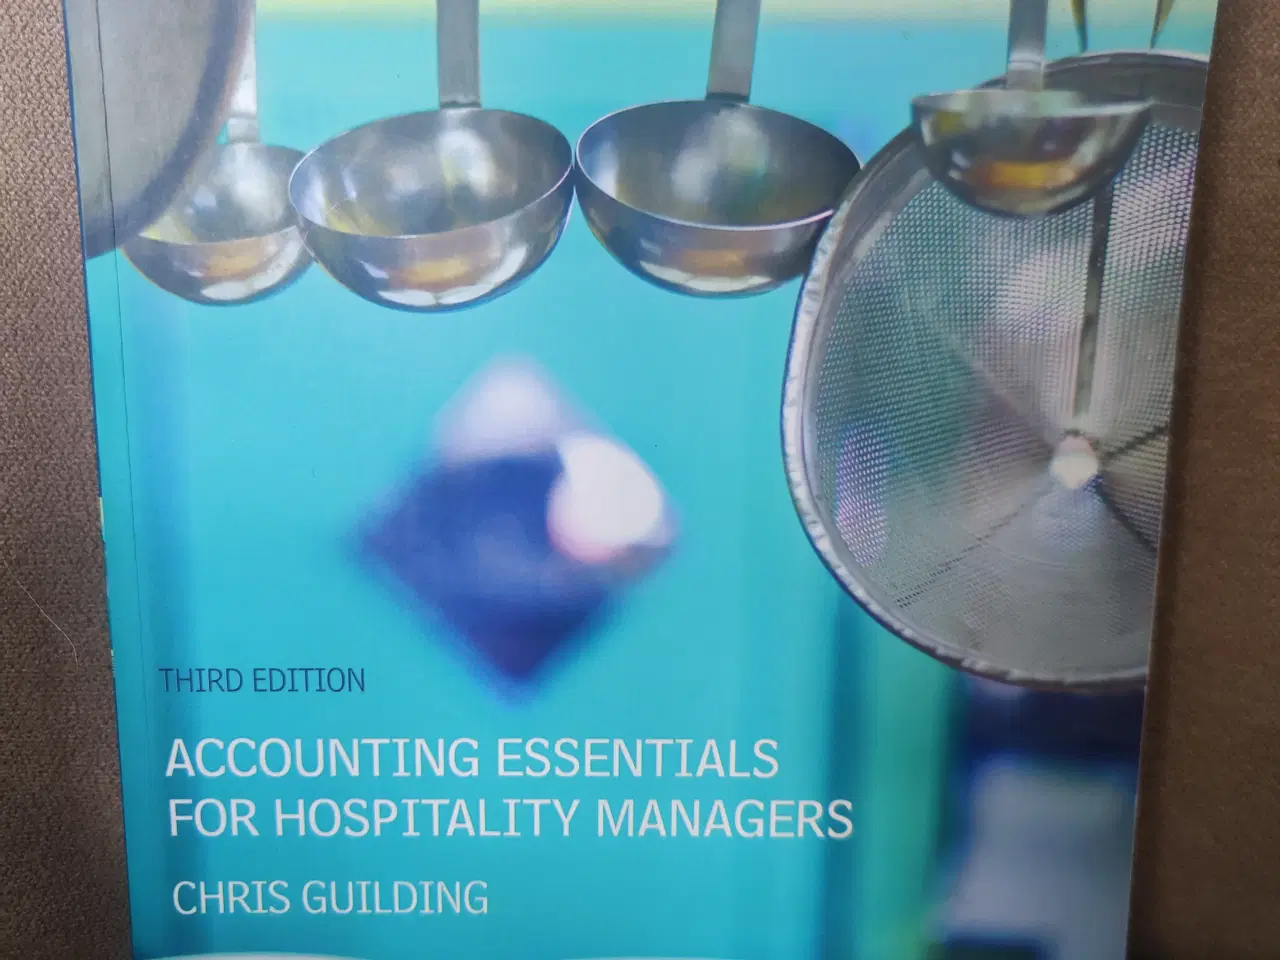 Billede 1 - Accounting essentials for hospital managers 